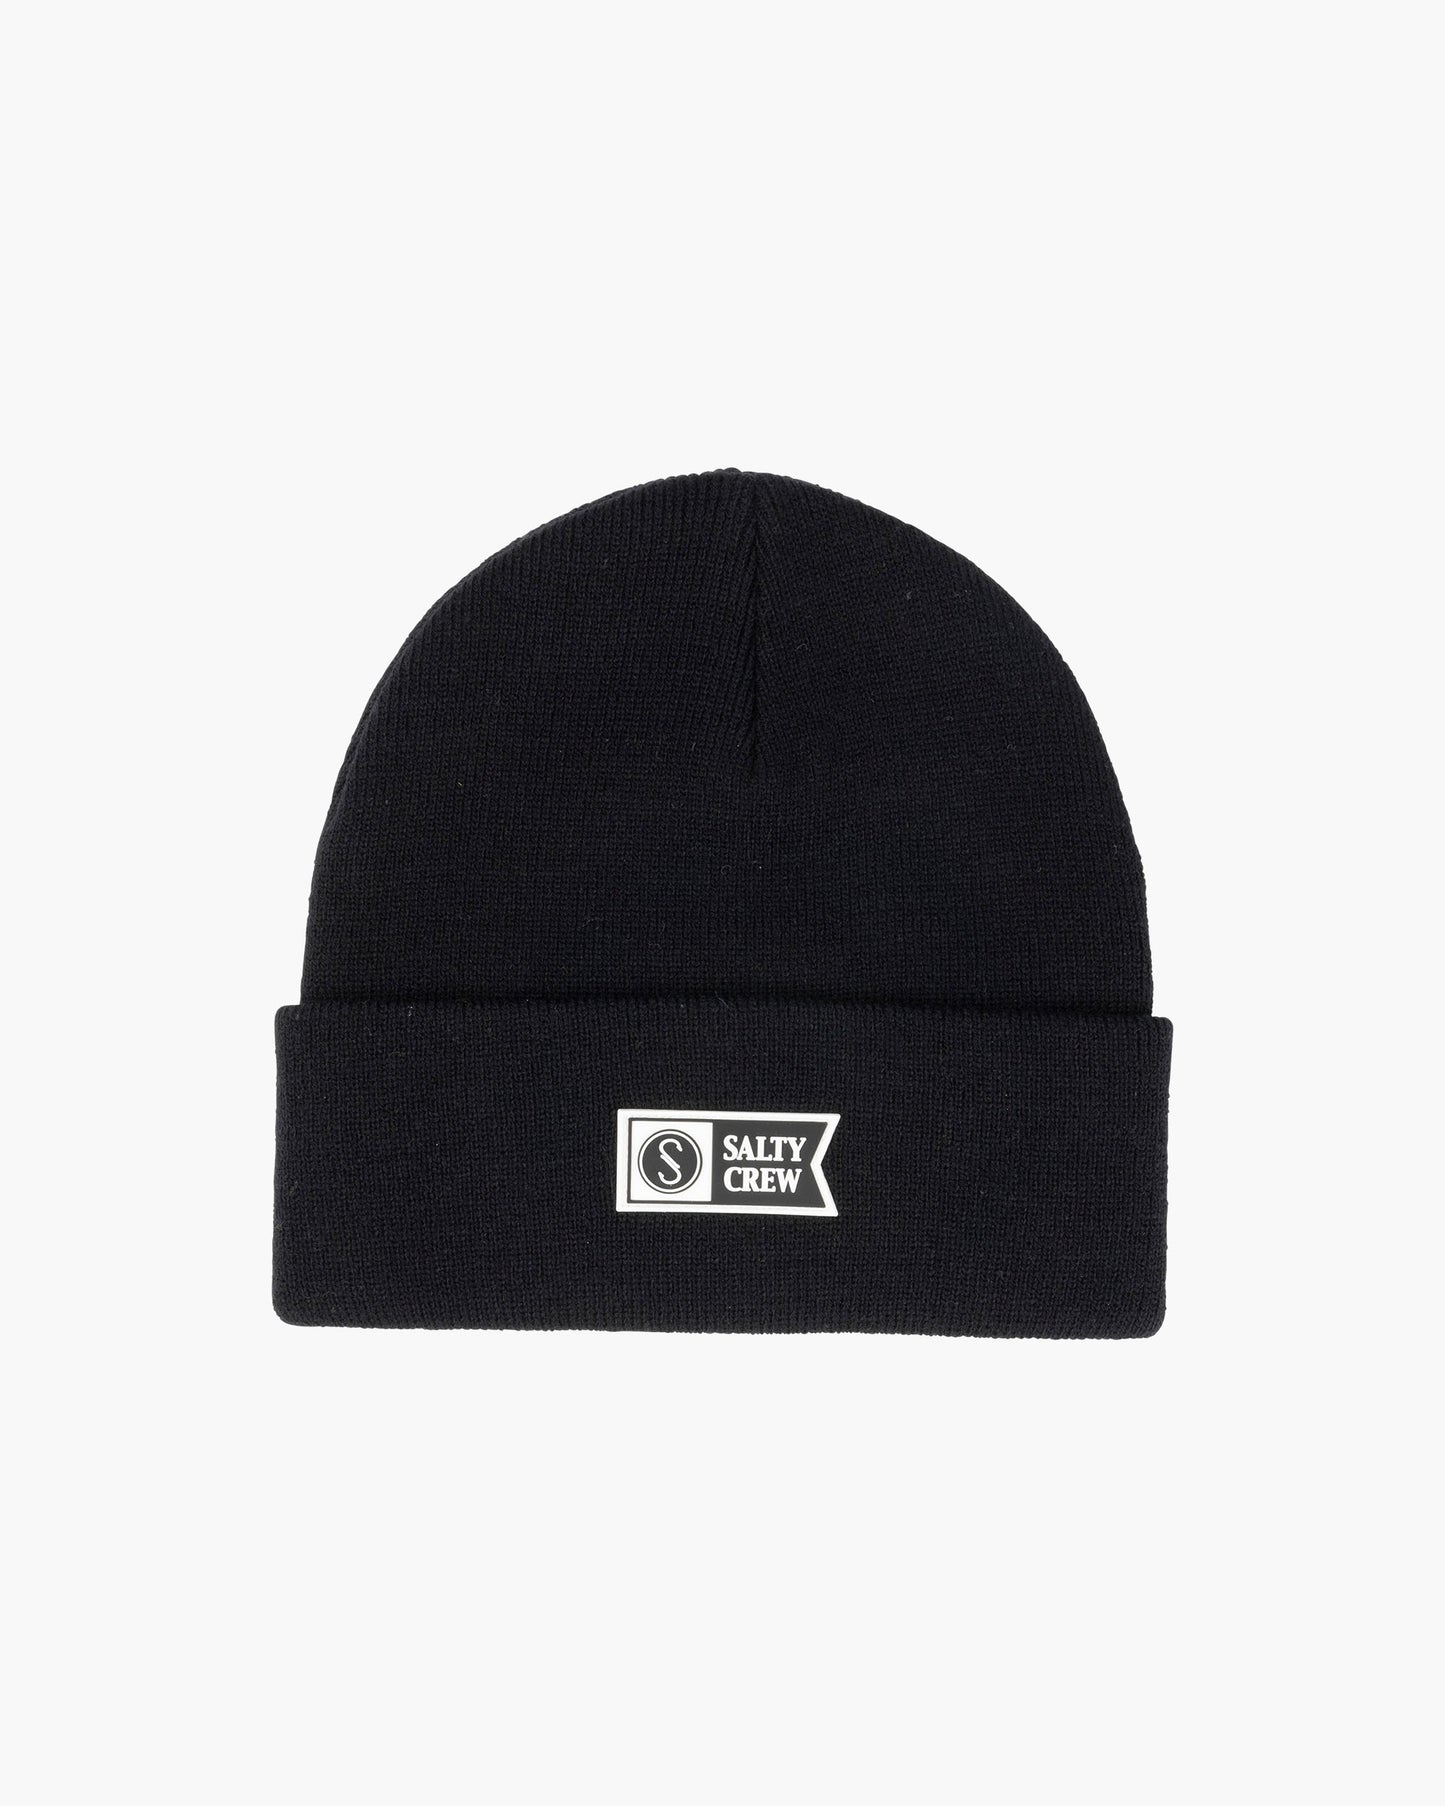 COLD FRONT BEANIE - Black